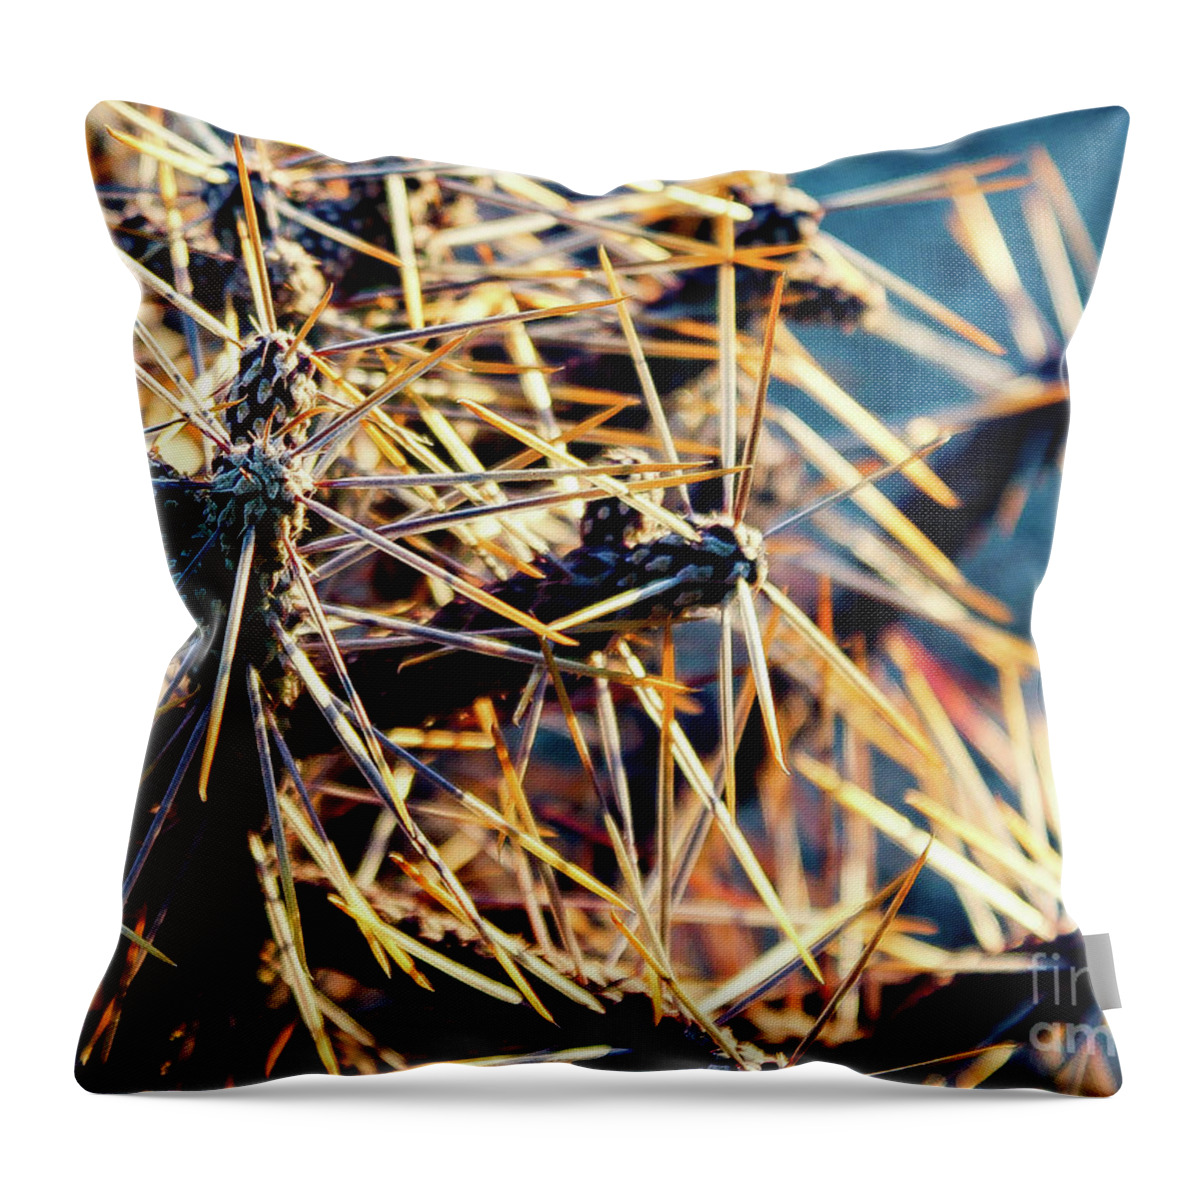 Cactus Throw Pillow featuring the photograph Looking Sharp by Adam Morsa